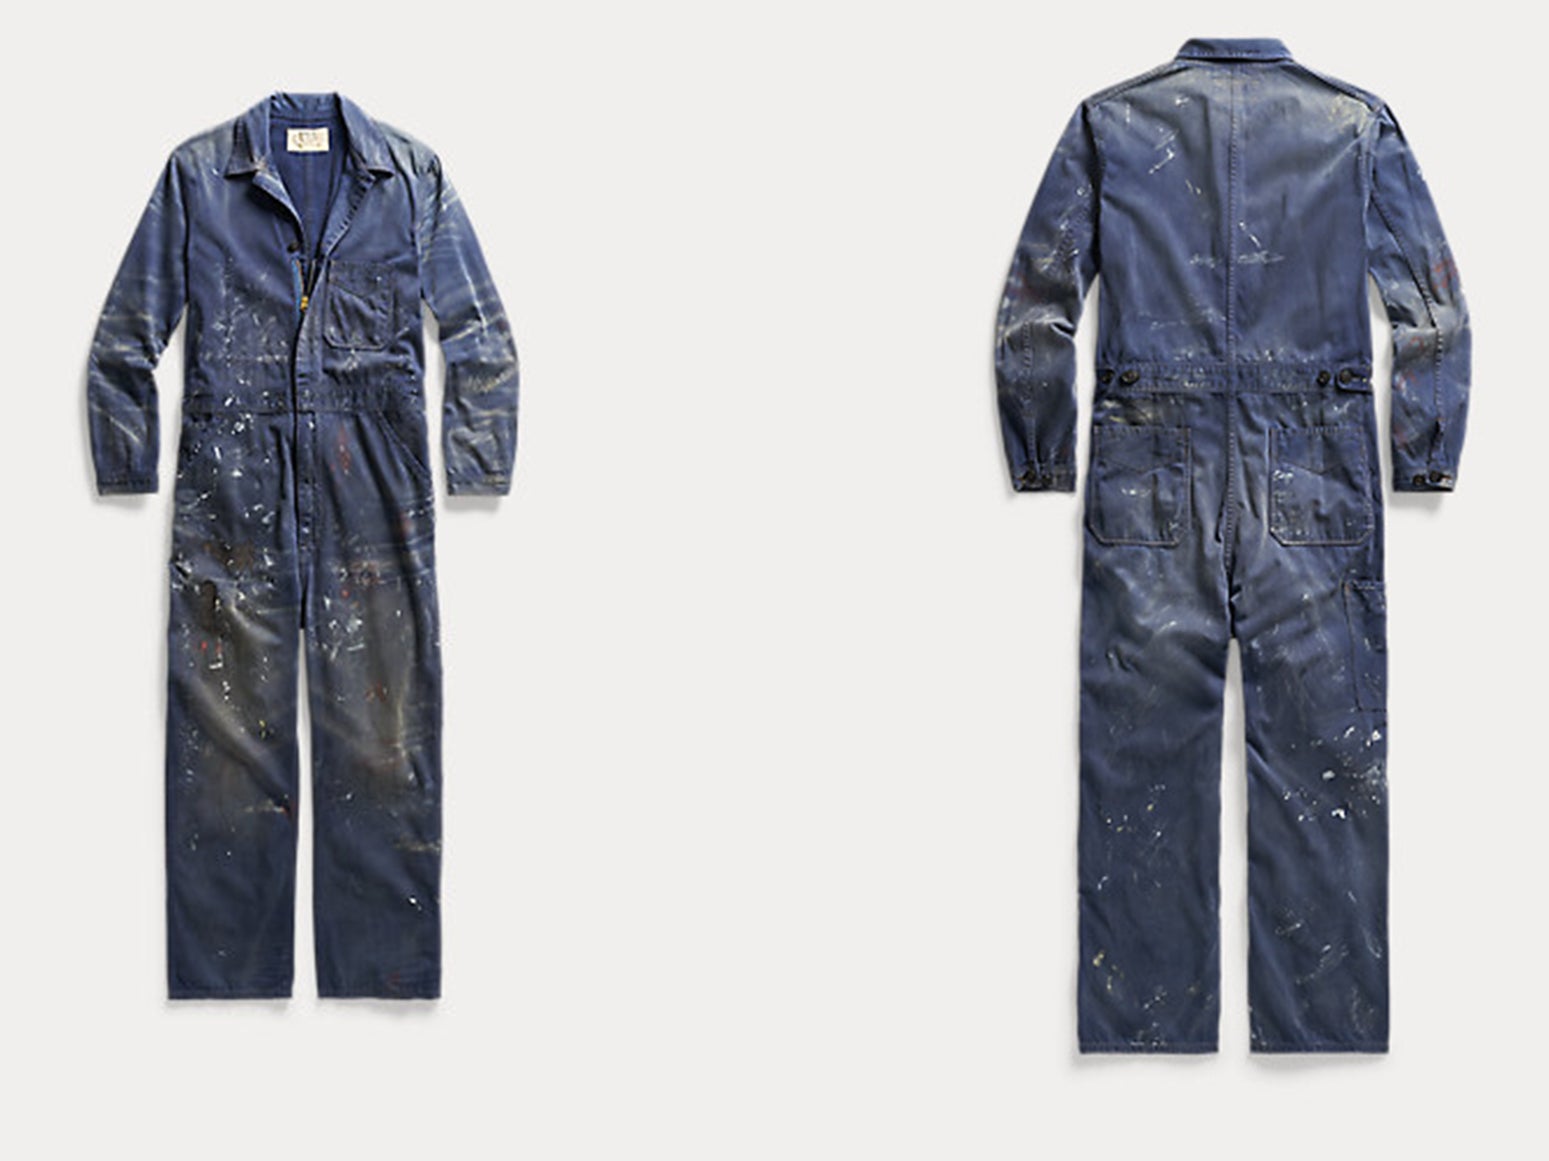 Ralph Lauren selling paint-splattered overalls for £620 | The Independent